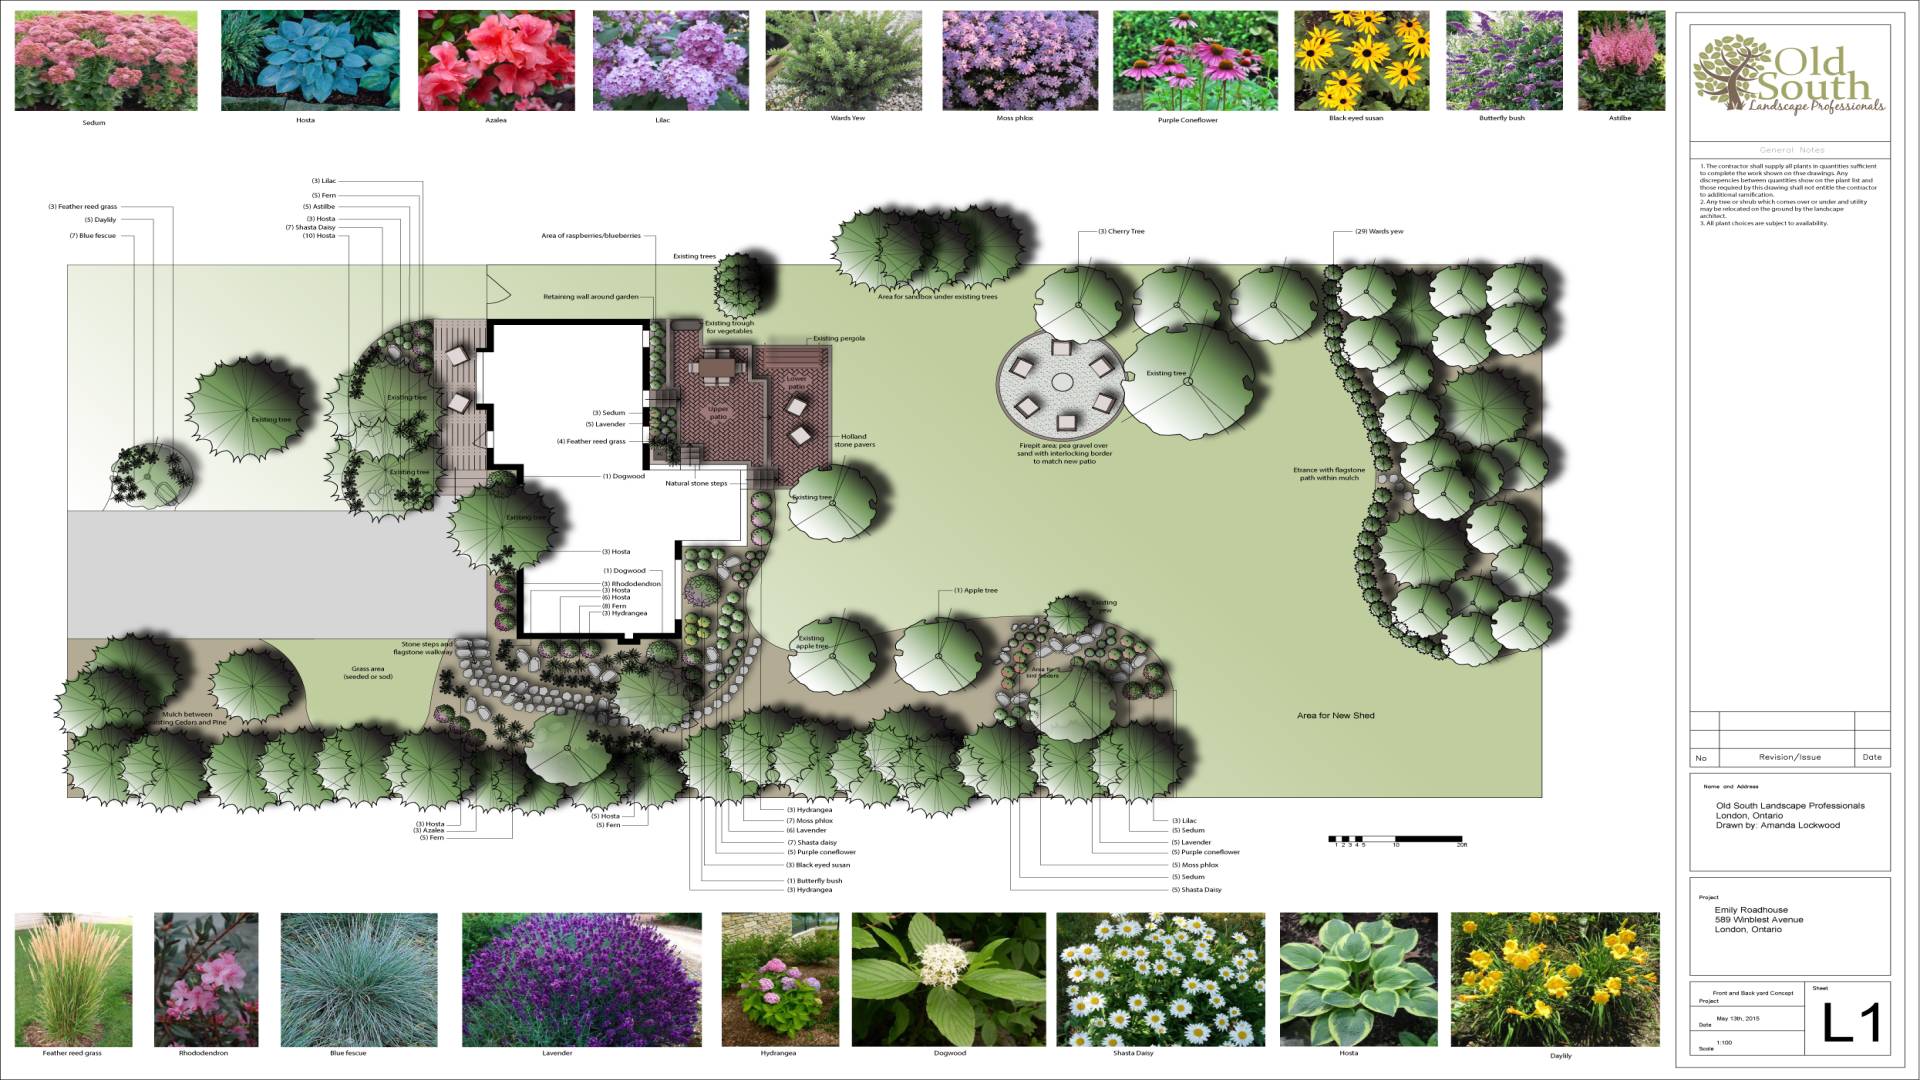 Sample landscape design. Detailed full-color drawing of the landscape design featuring meticulously labelled items with photos of plants in the plant legend bars above and below the full color drawing.